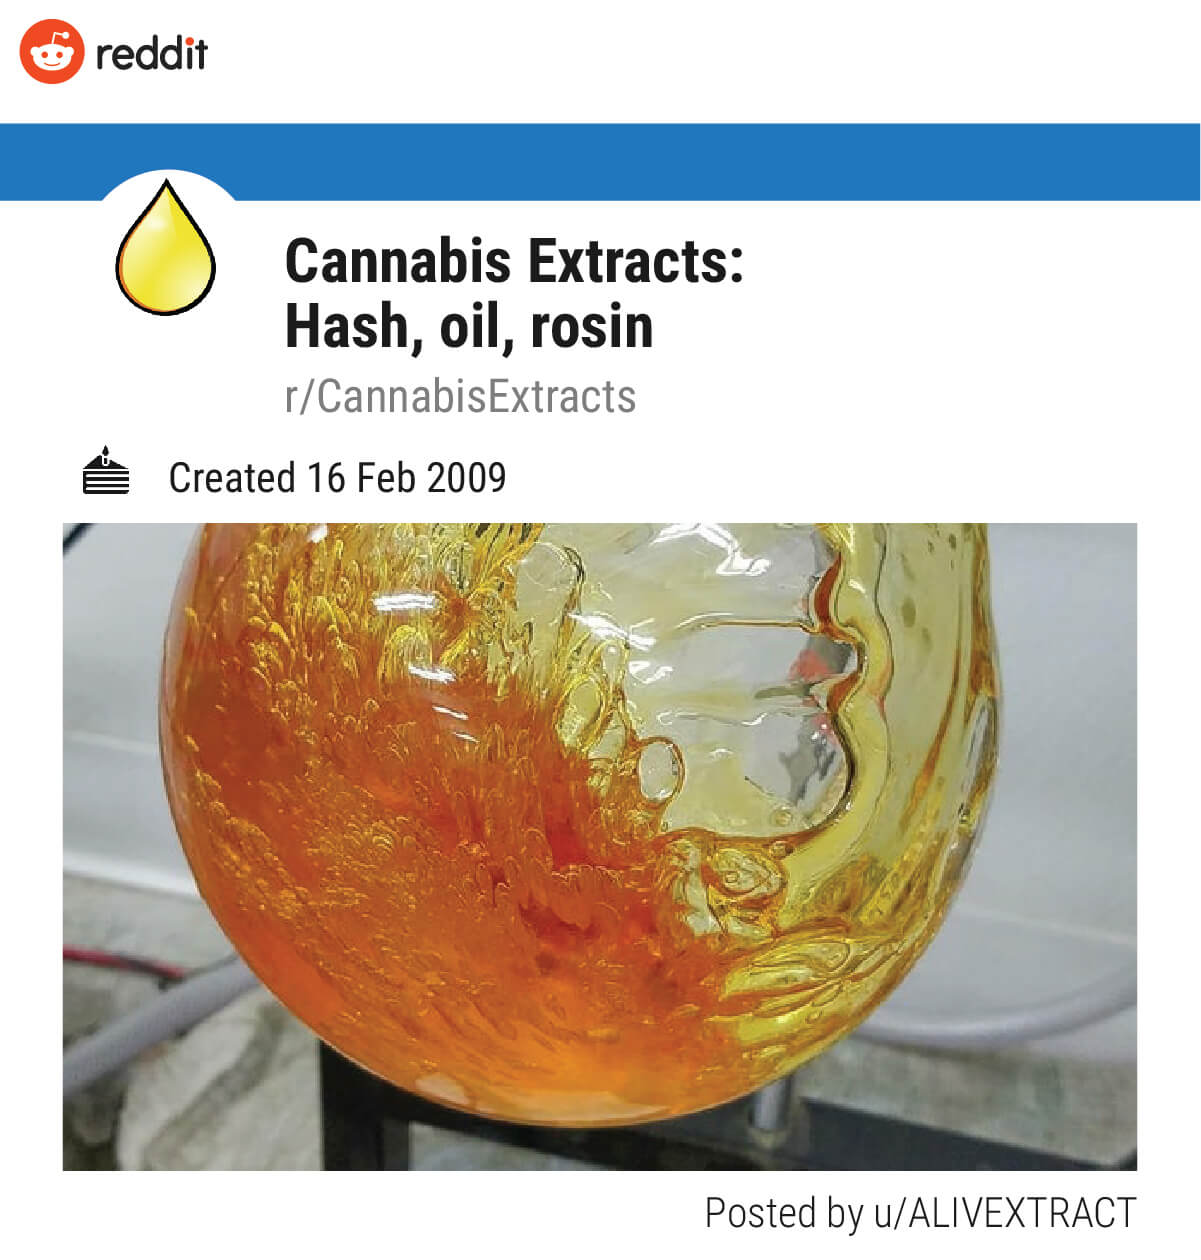 Cannabis Extracts: Hash, Oil, Rosin (r/CannabisExtracts)